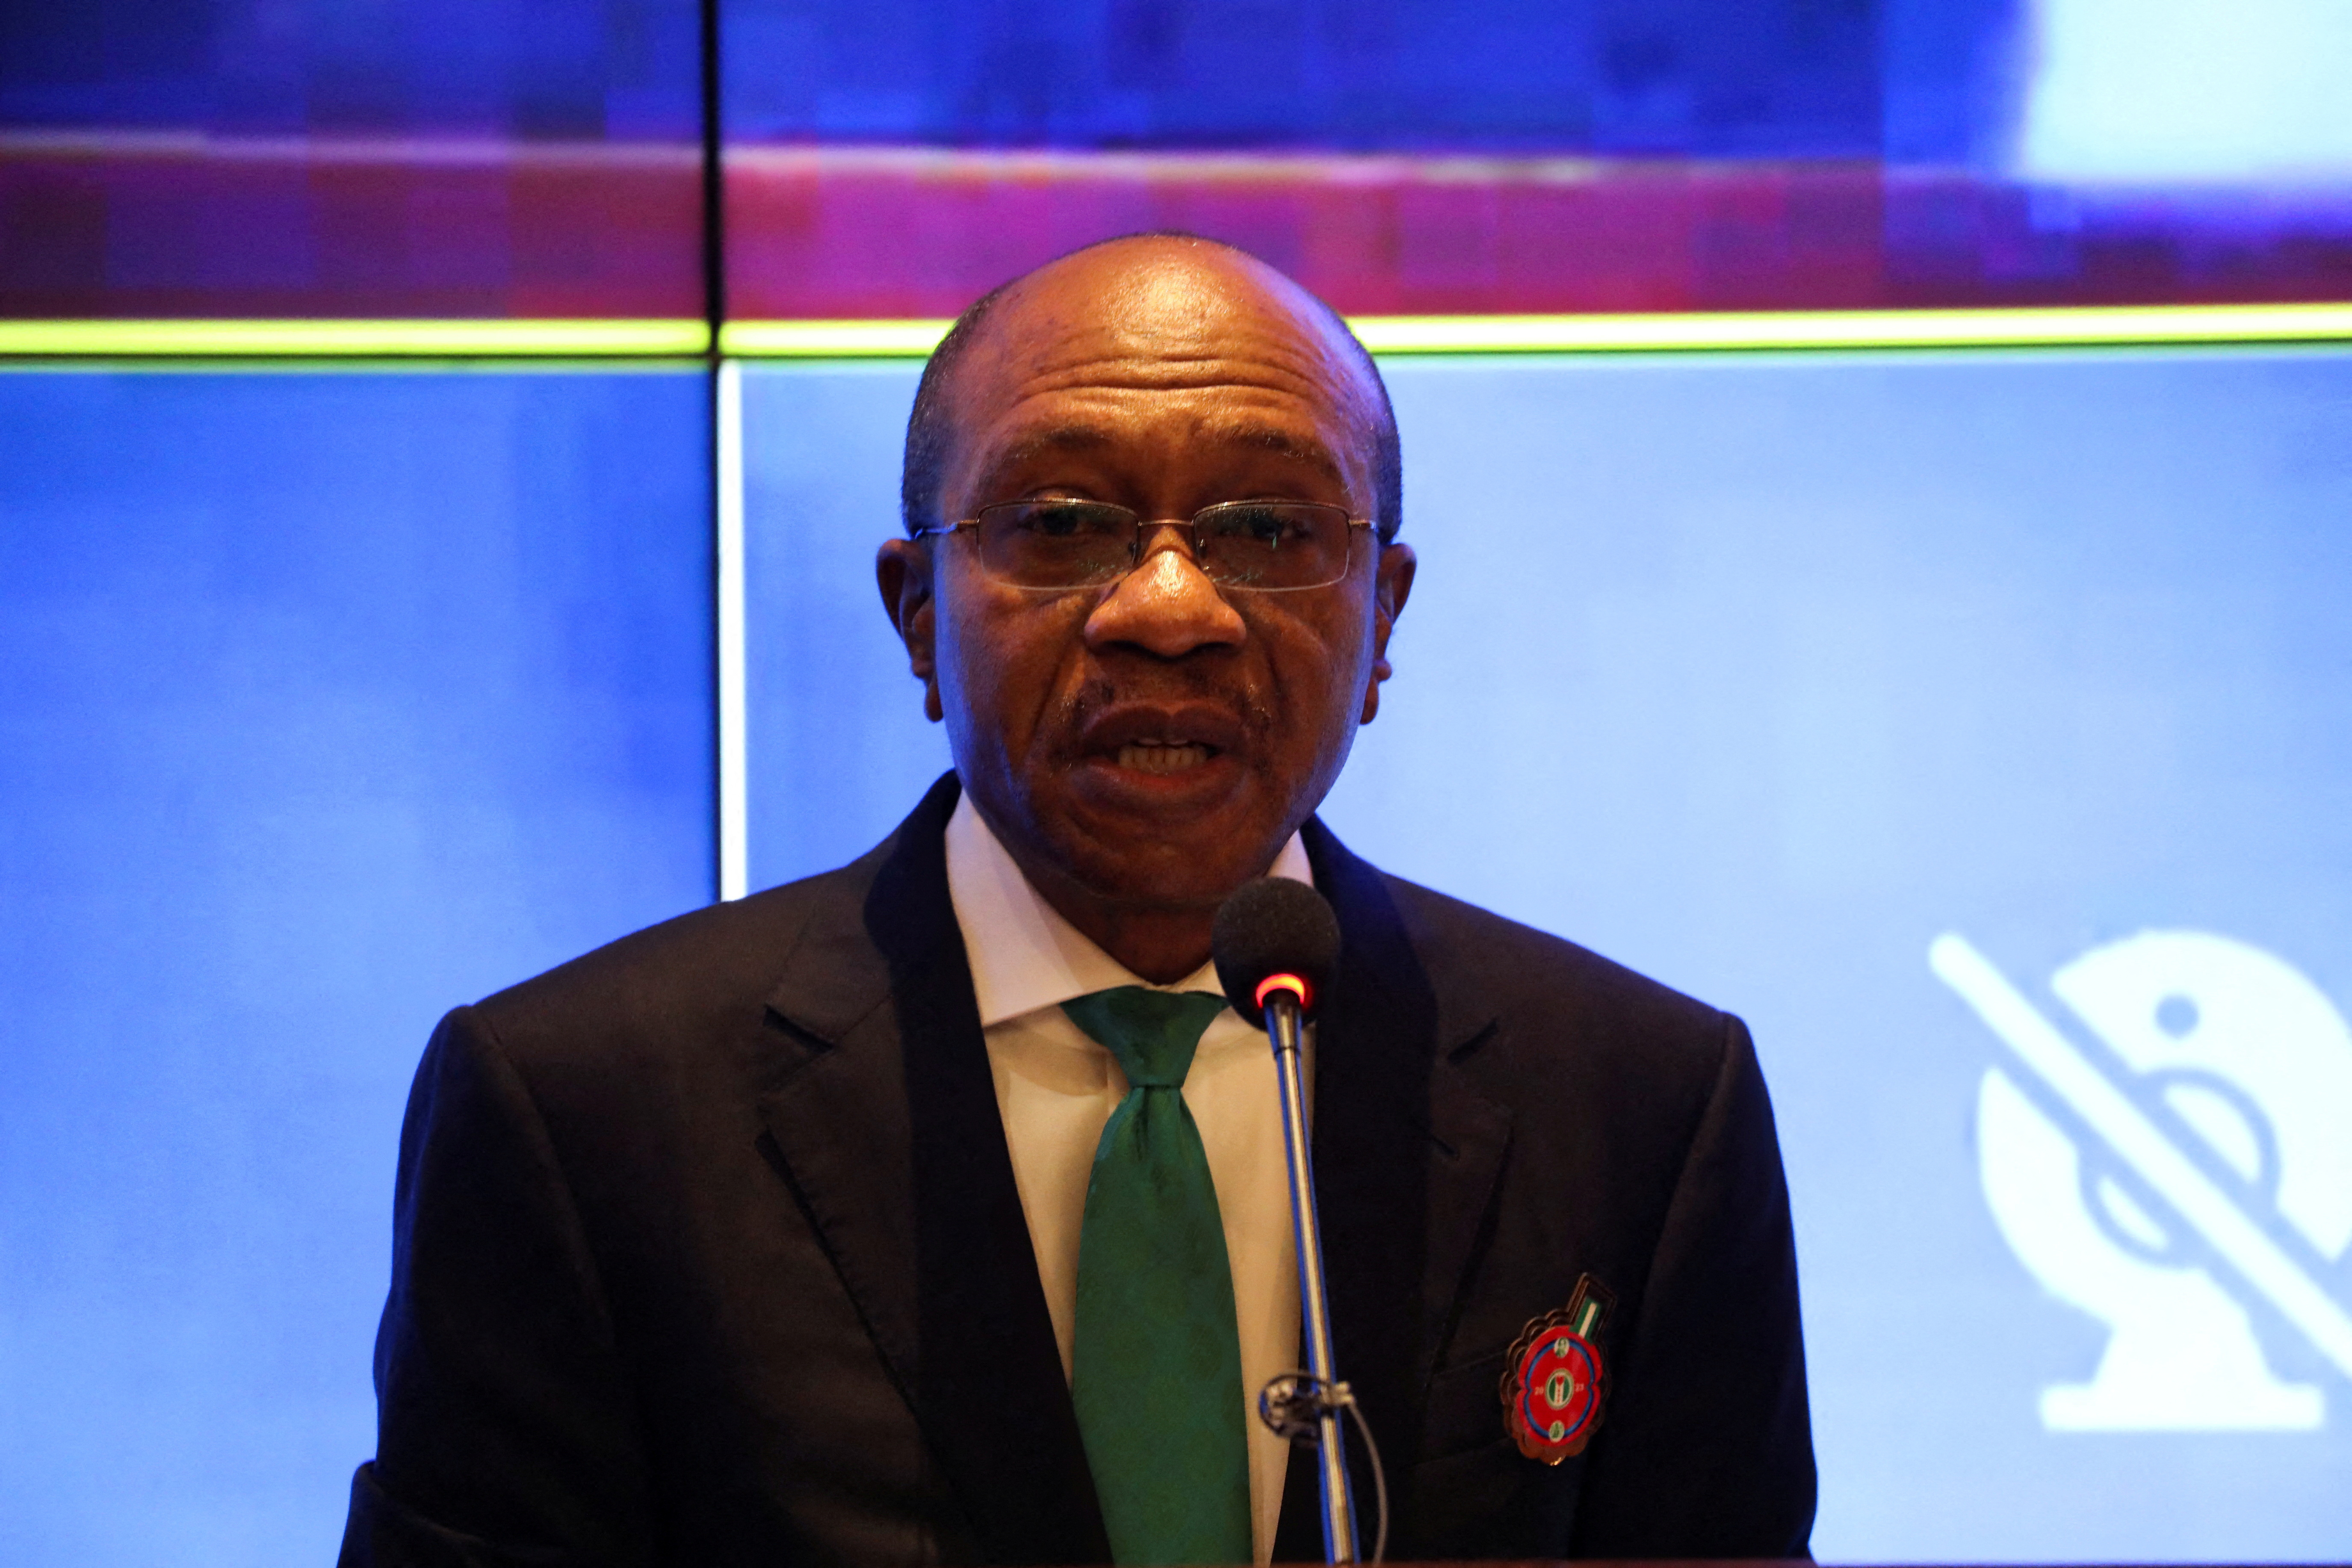 Central Bank Governor Godwin Emefiele speaks during the launch of the new Nigerian currency in Abuja